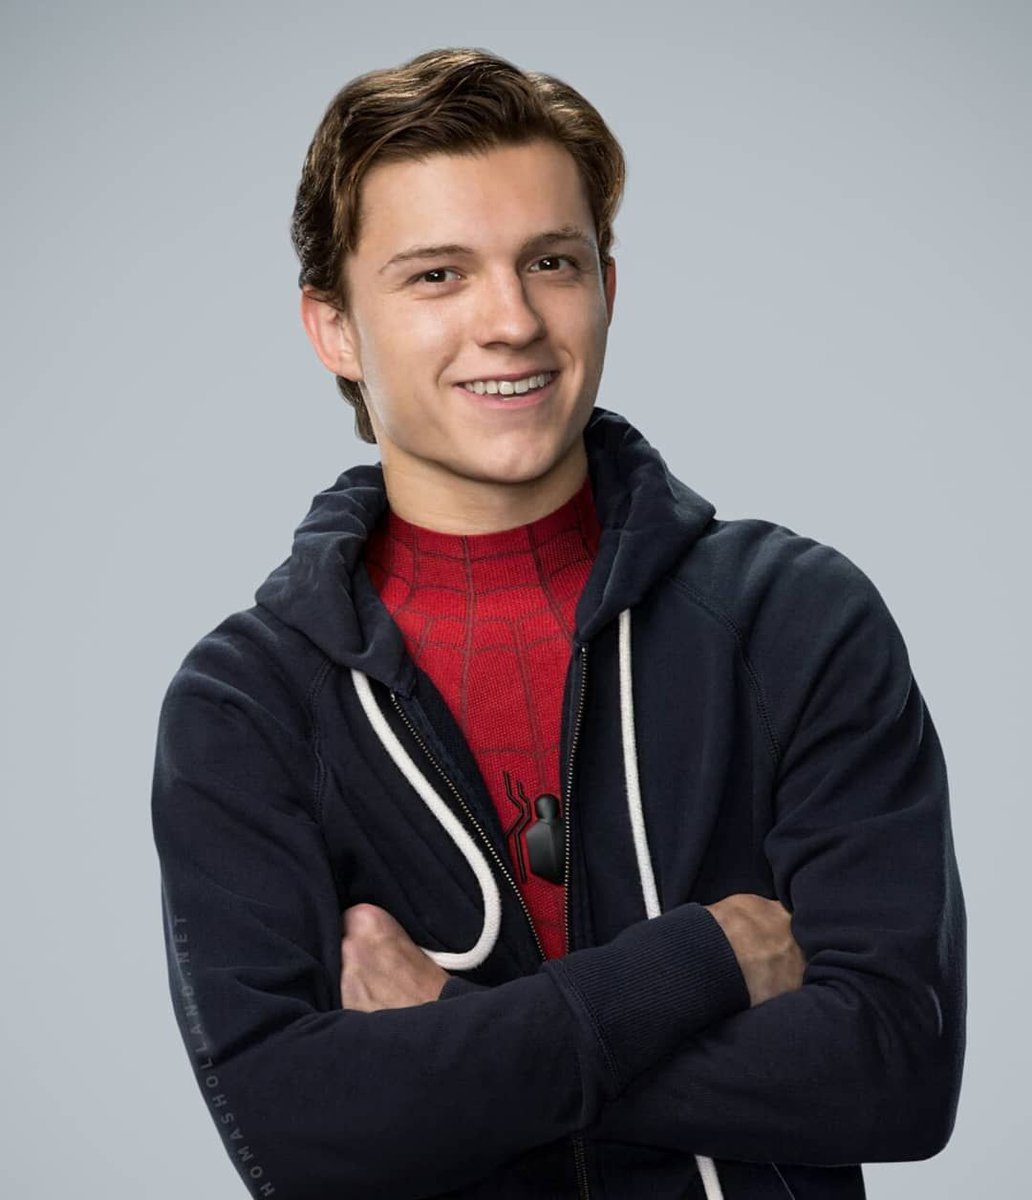 RT @hpspideywayne: tom holland promotional shoot for spider-man homecoming: a thread https://t.co/3iZb1f0Lxs